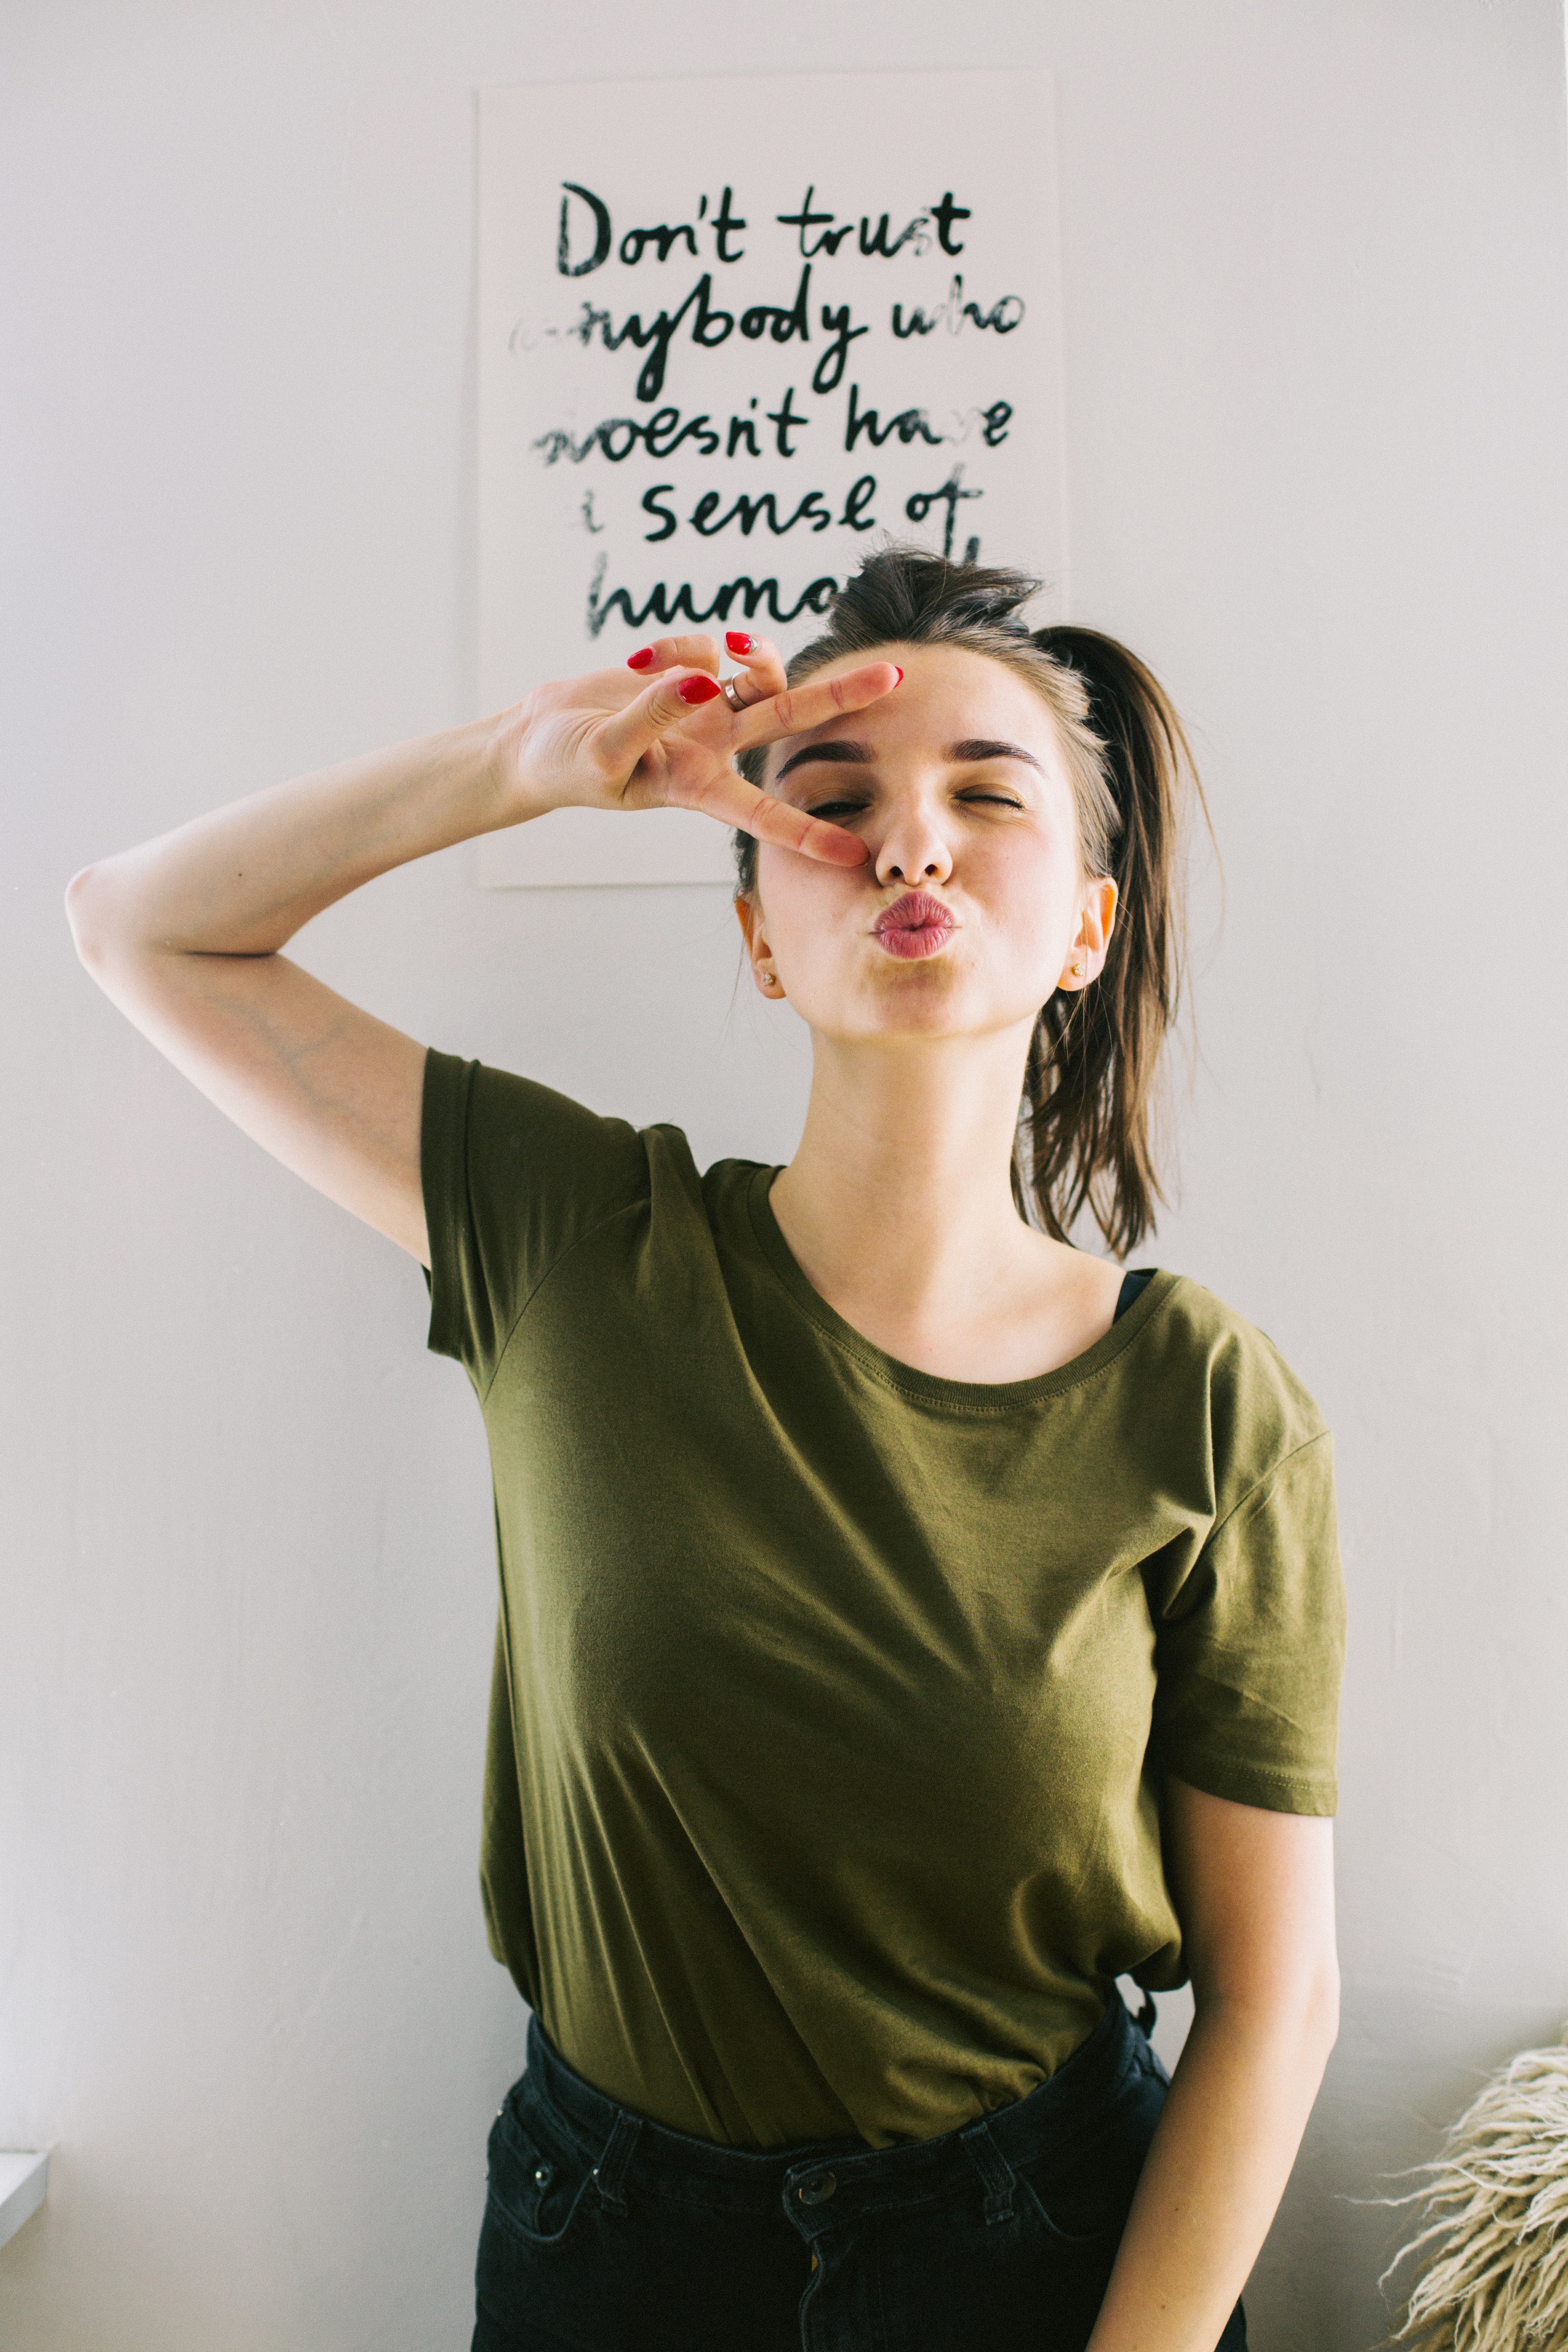 Woman Wearing Green Crew-neck T-shirt and Black Denim Bottoms Making Face Behind Don't Trust Anybody Who Doesn't Have a Sense of Humor Quote on White Wall, Adolescent, Looking, Woman, Wear, HQ Photo